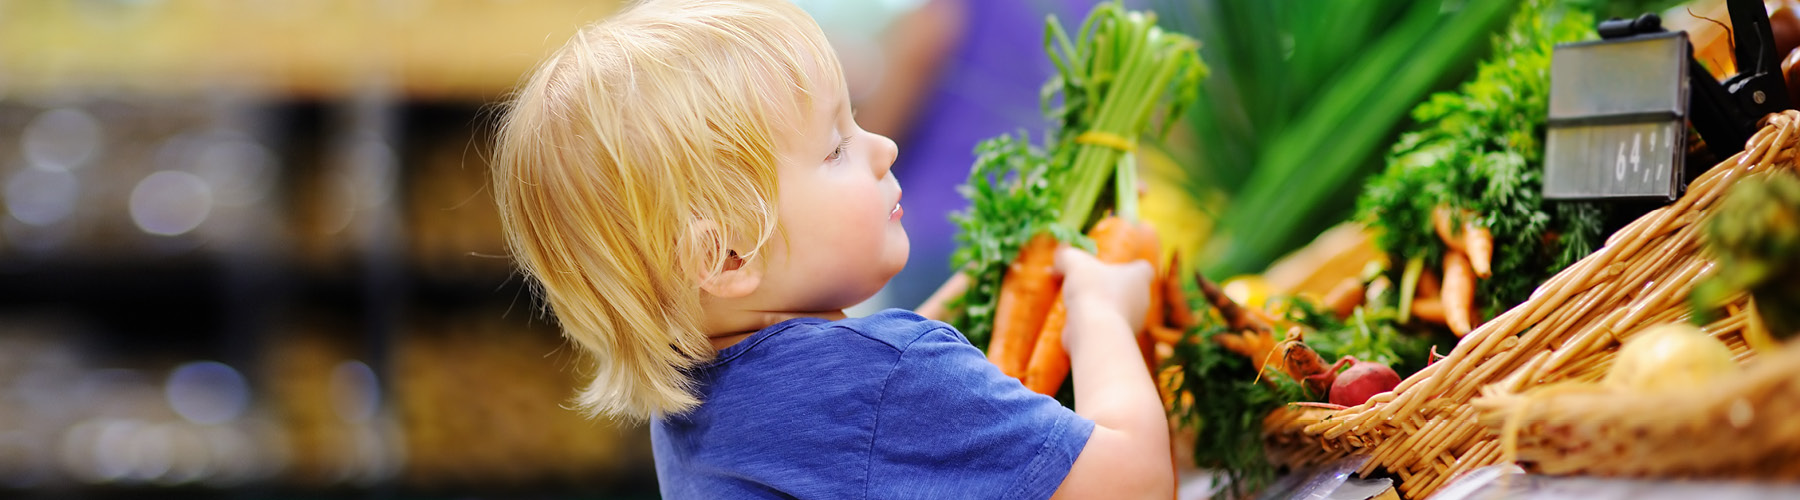 child picking healthy foods